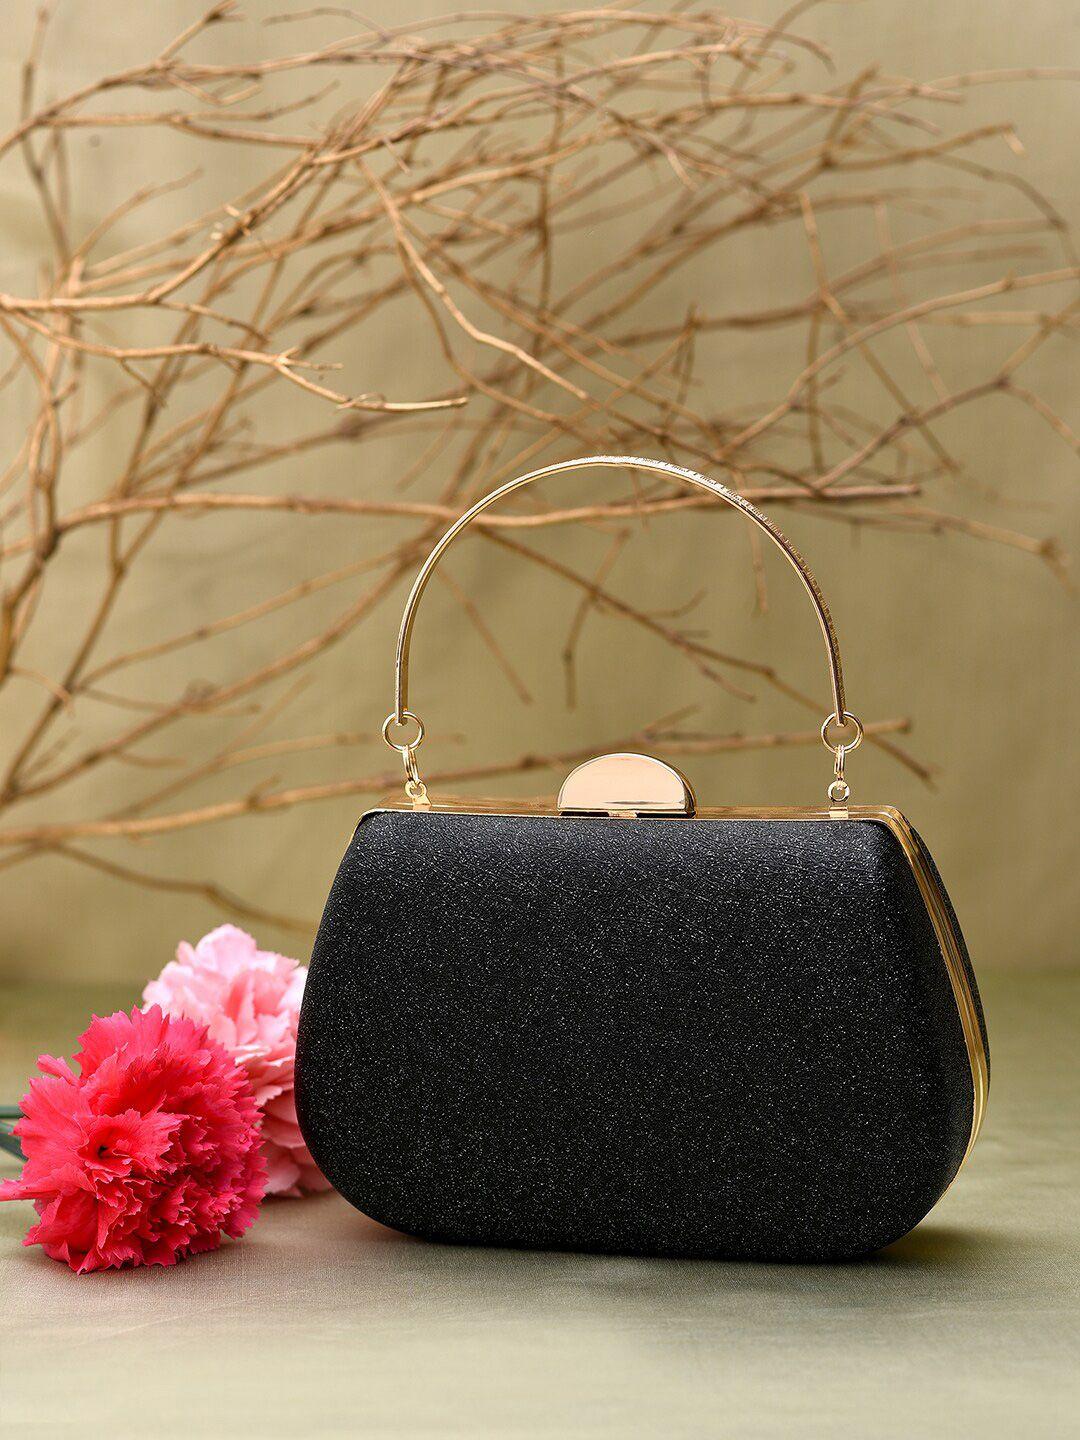 haute sauce by campus sutra black & gold-toned textured box clutch